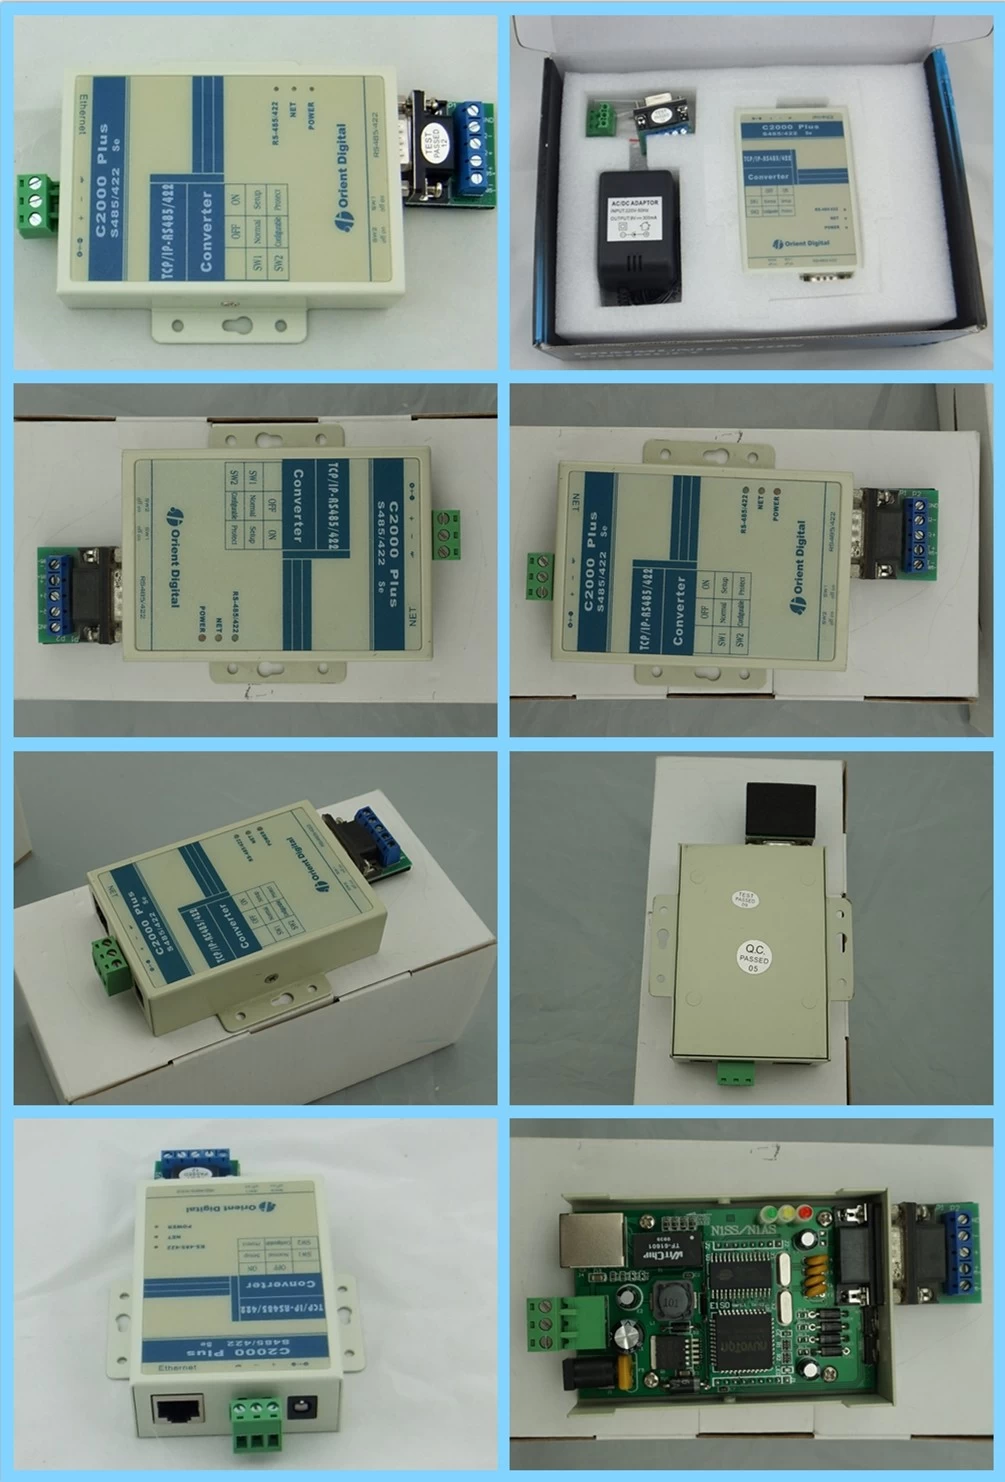 Data transmission converter RS232/485 to TCP/IP EA-06